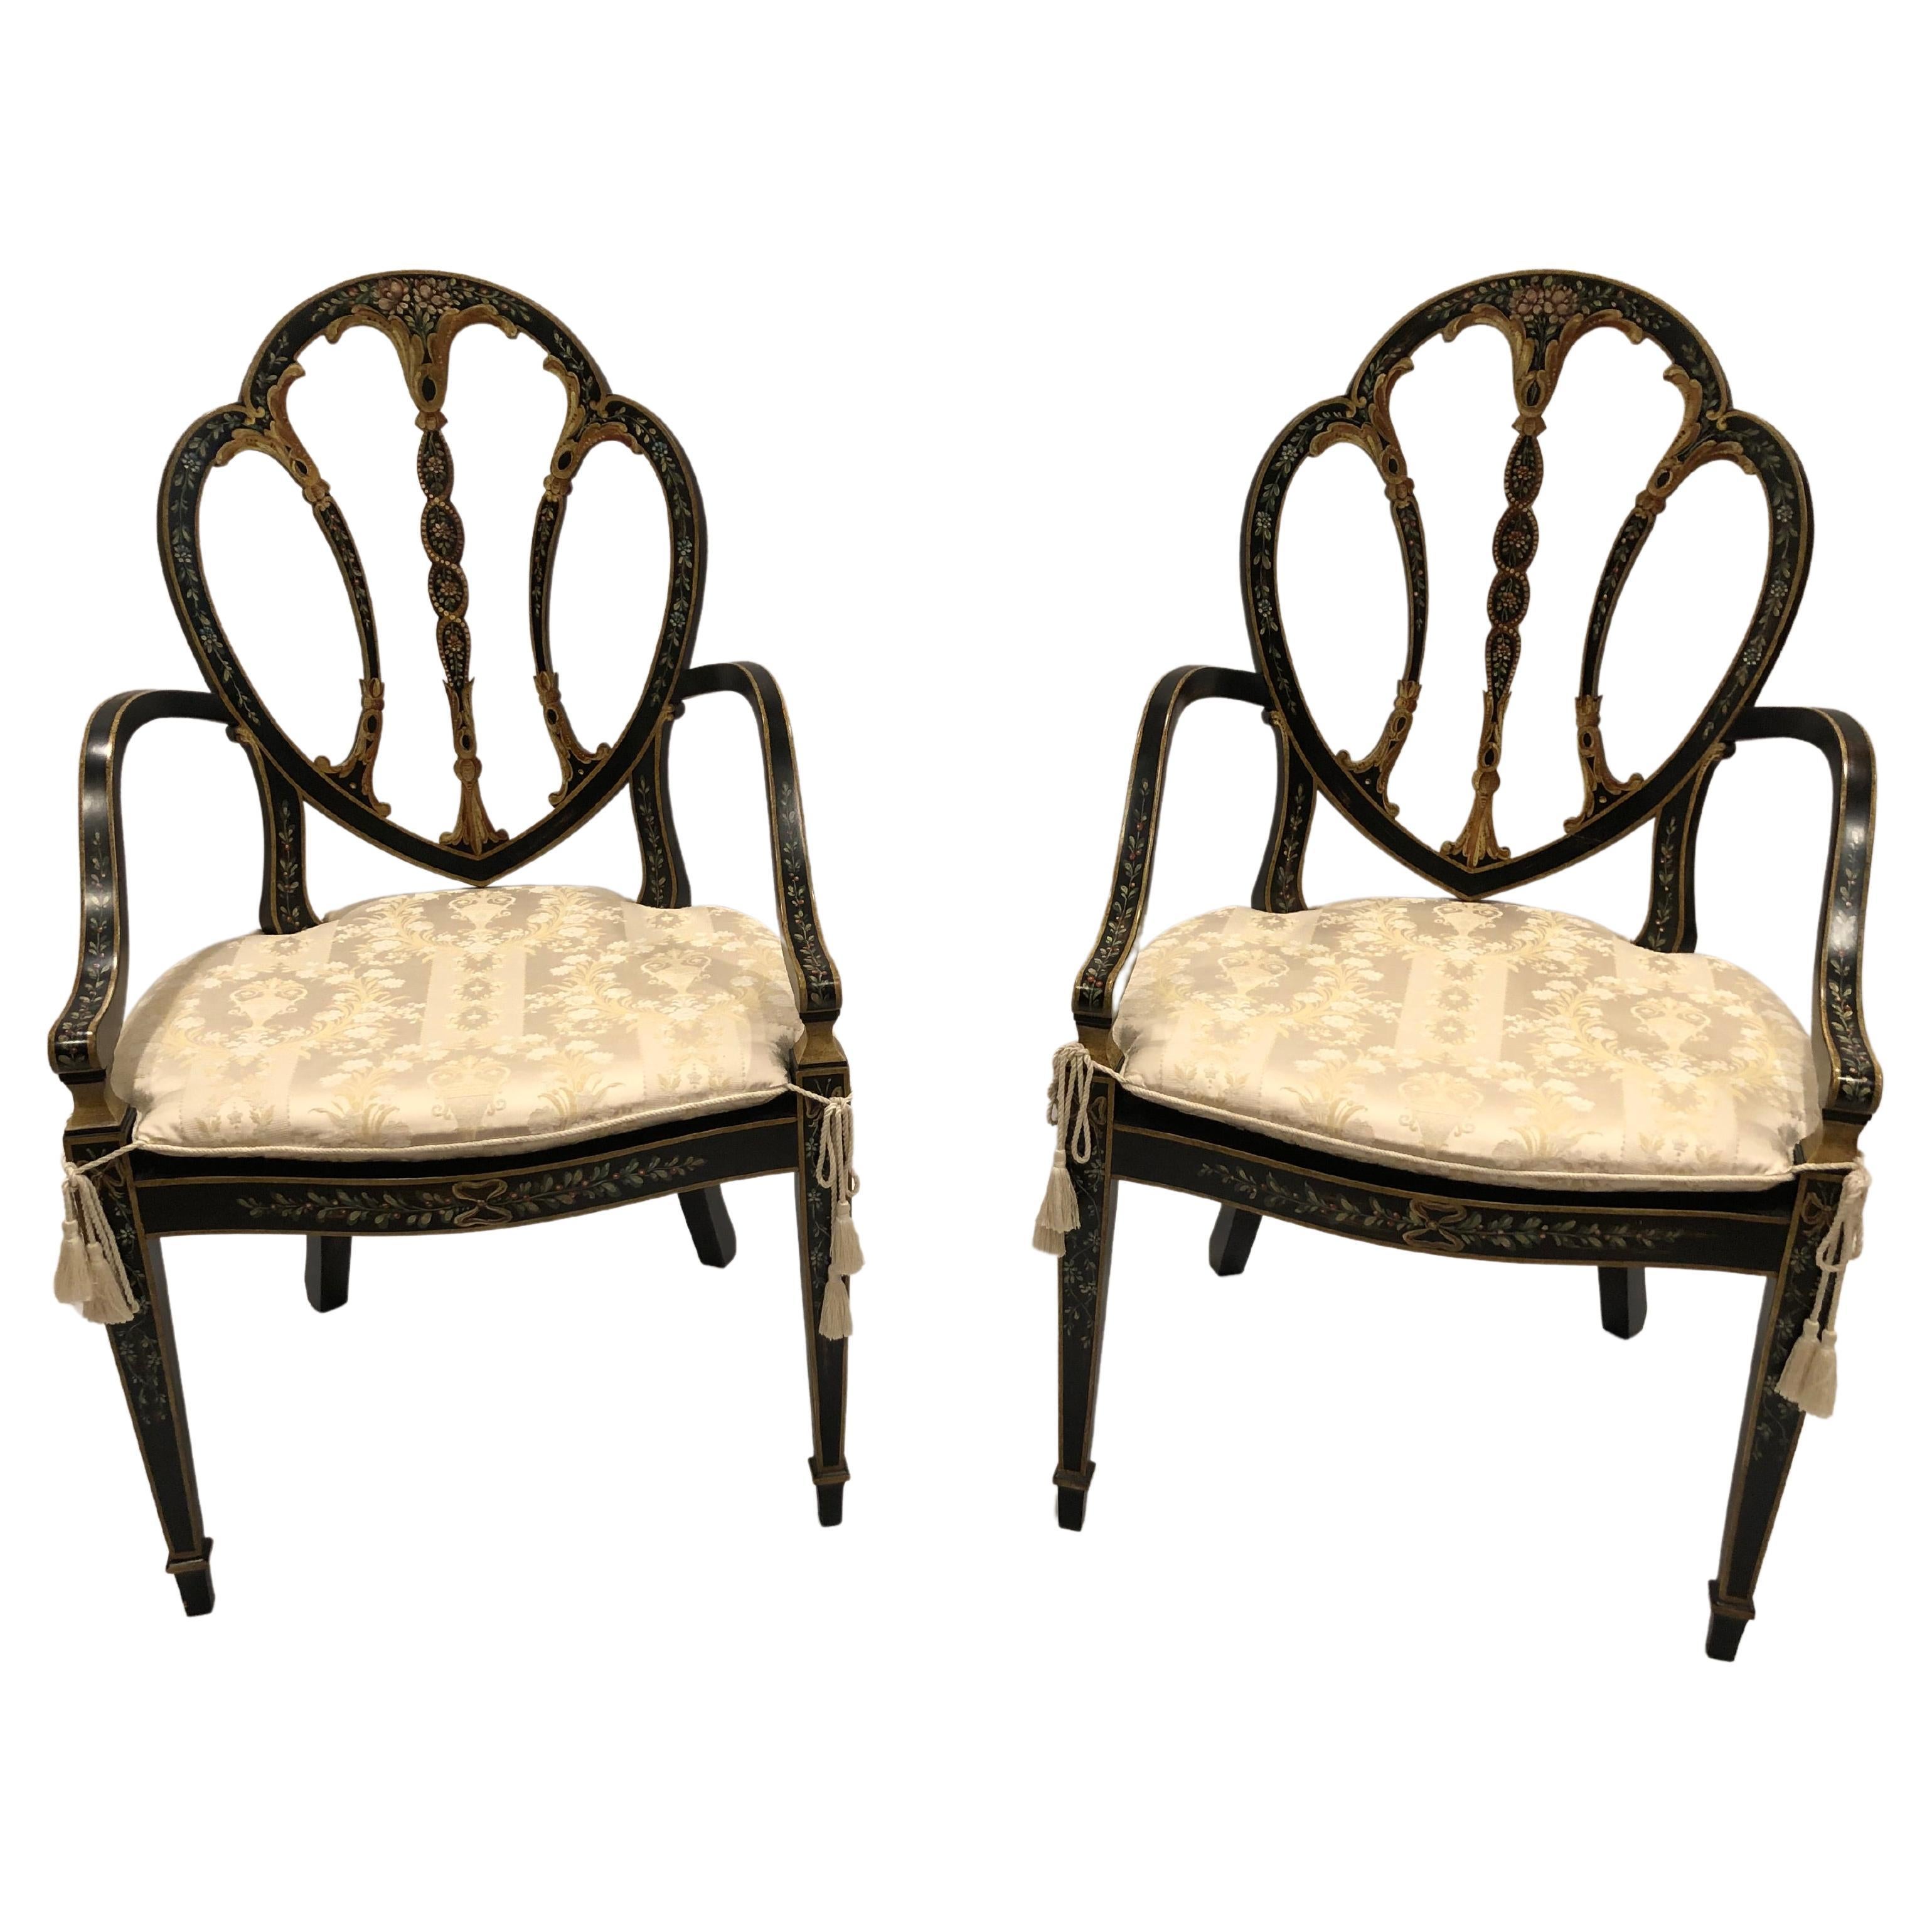 Superb Pair of Adam Style Handpainted Armchairs with Caned Seats For Sale